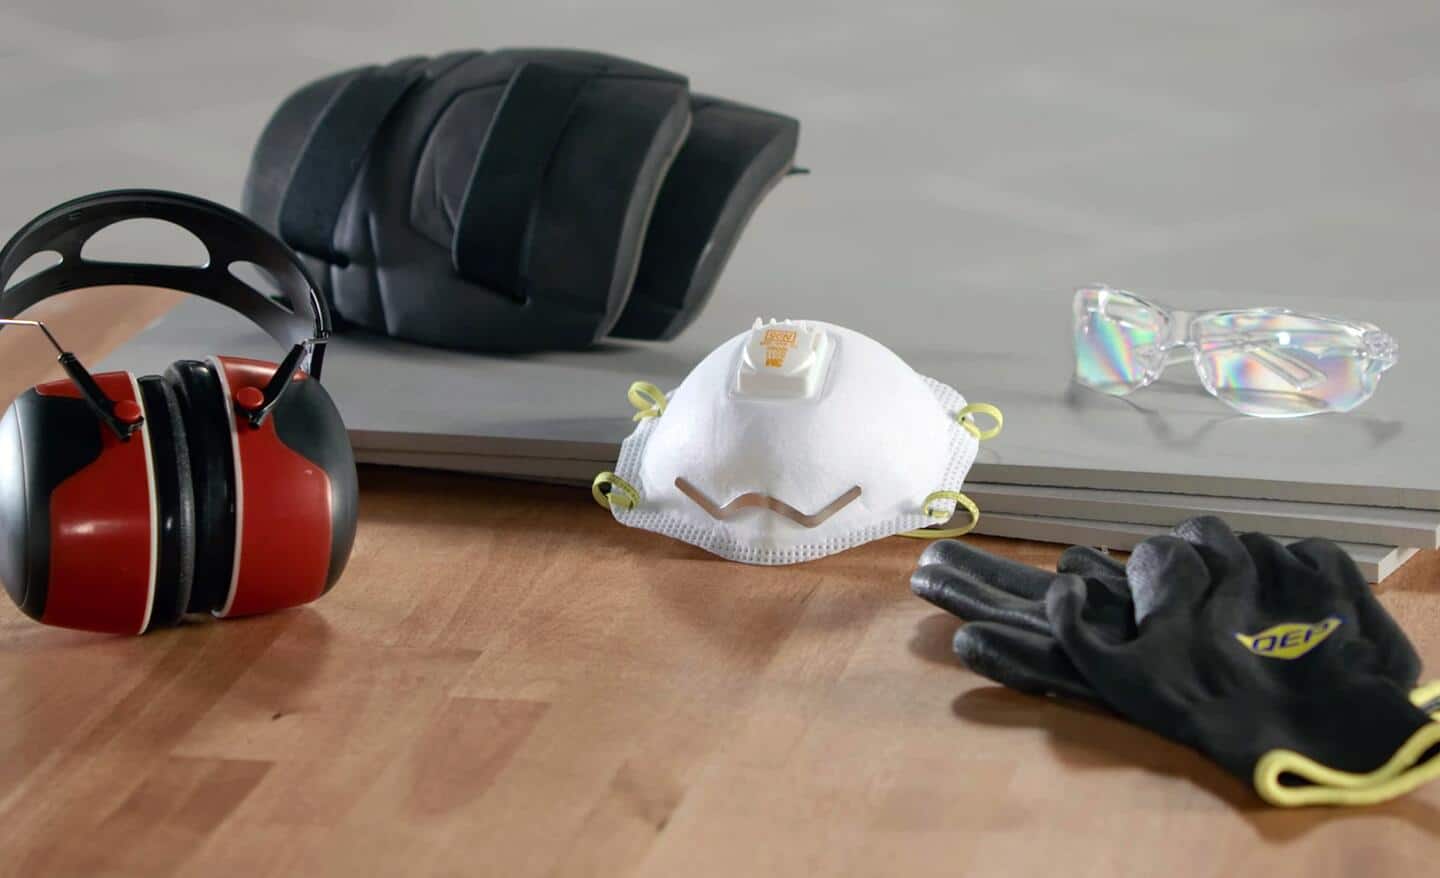 Gloves, kneepads, safety glasses and other safety equipment lying on tile.